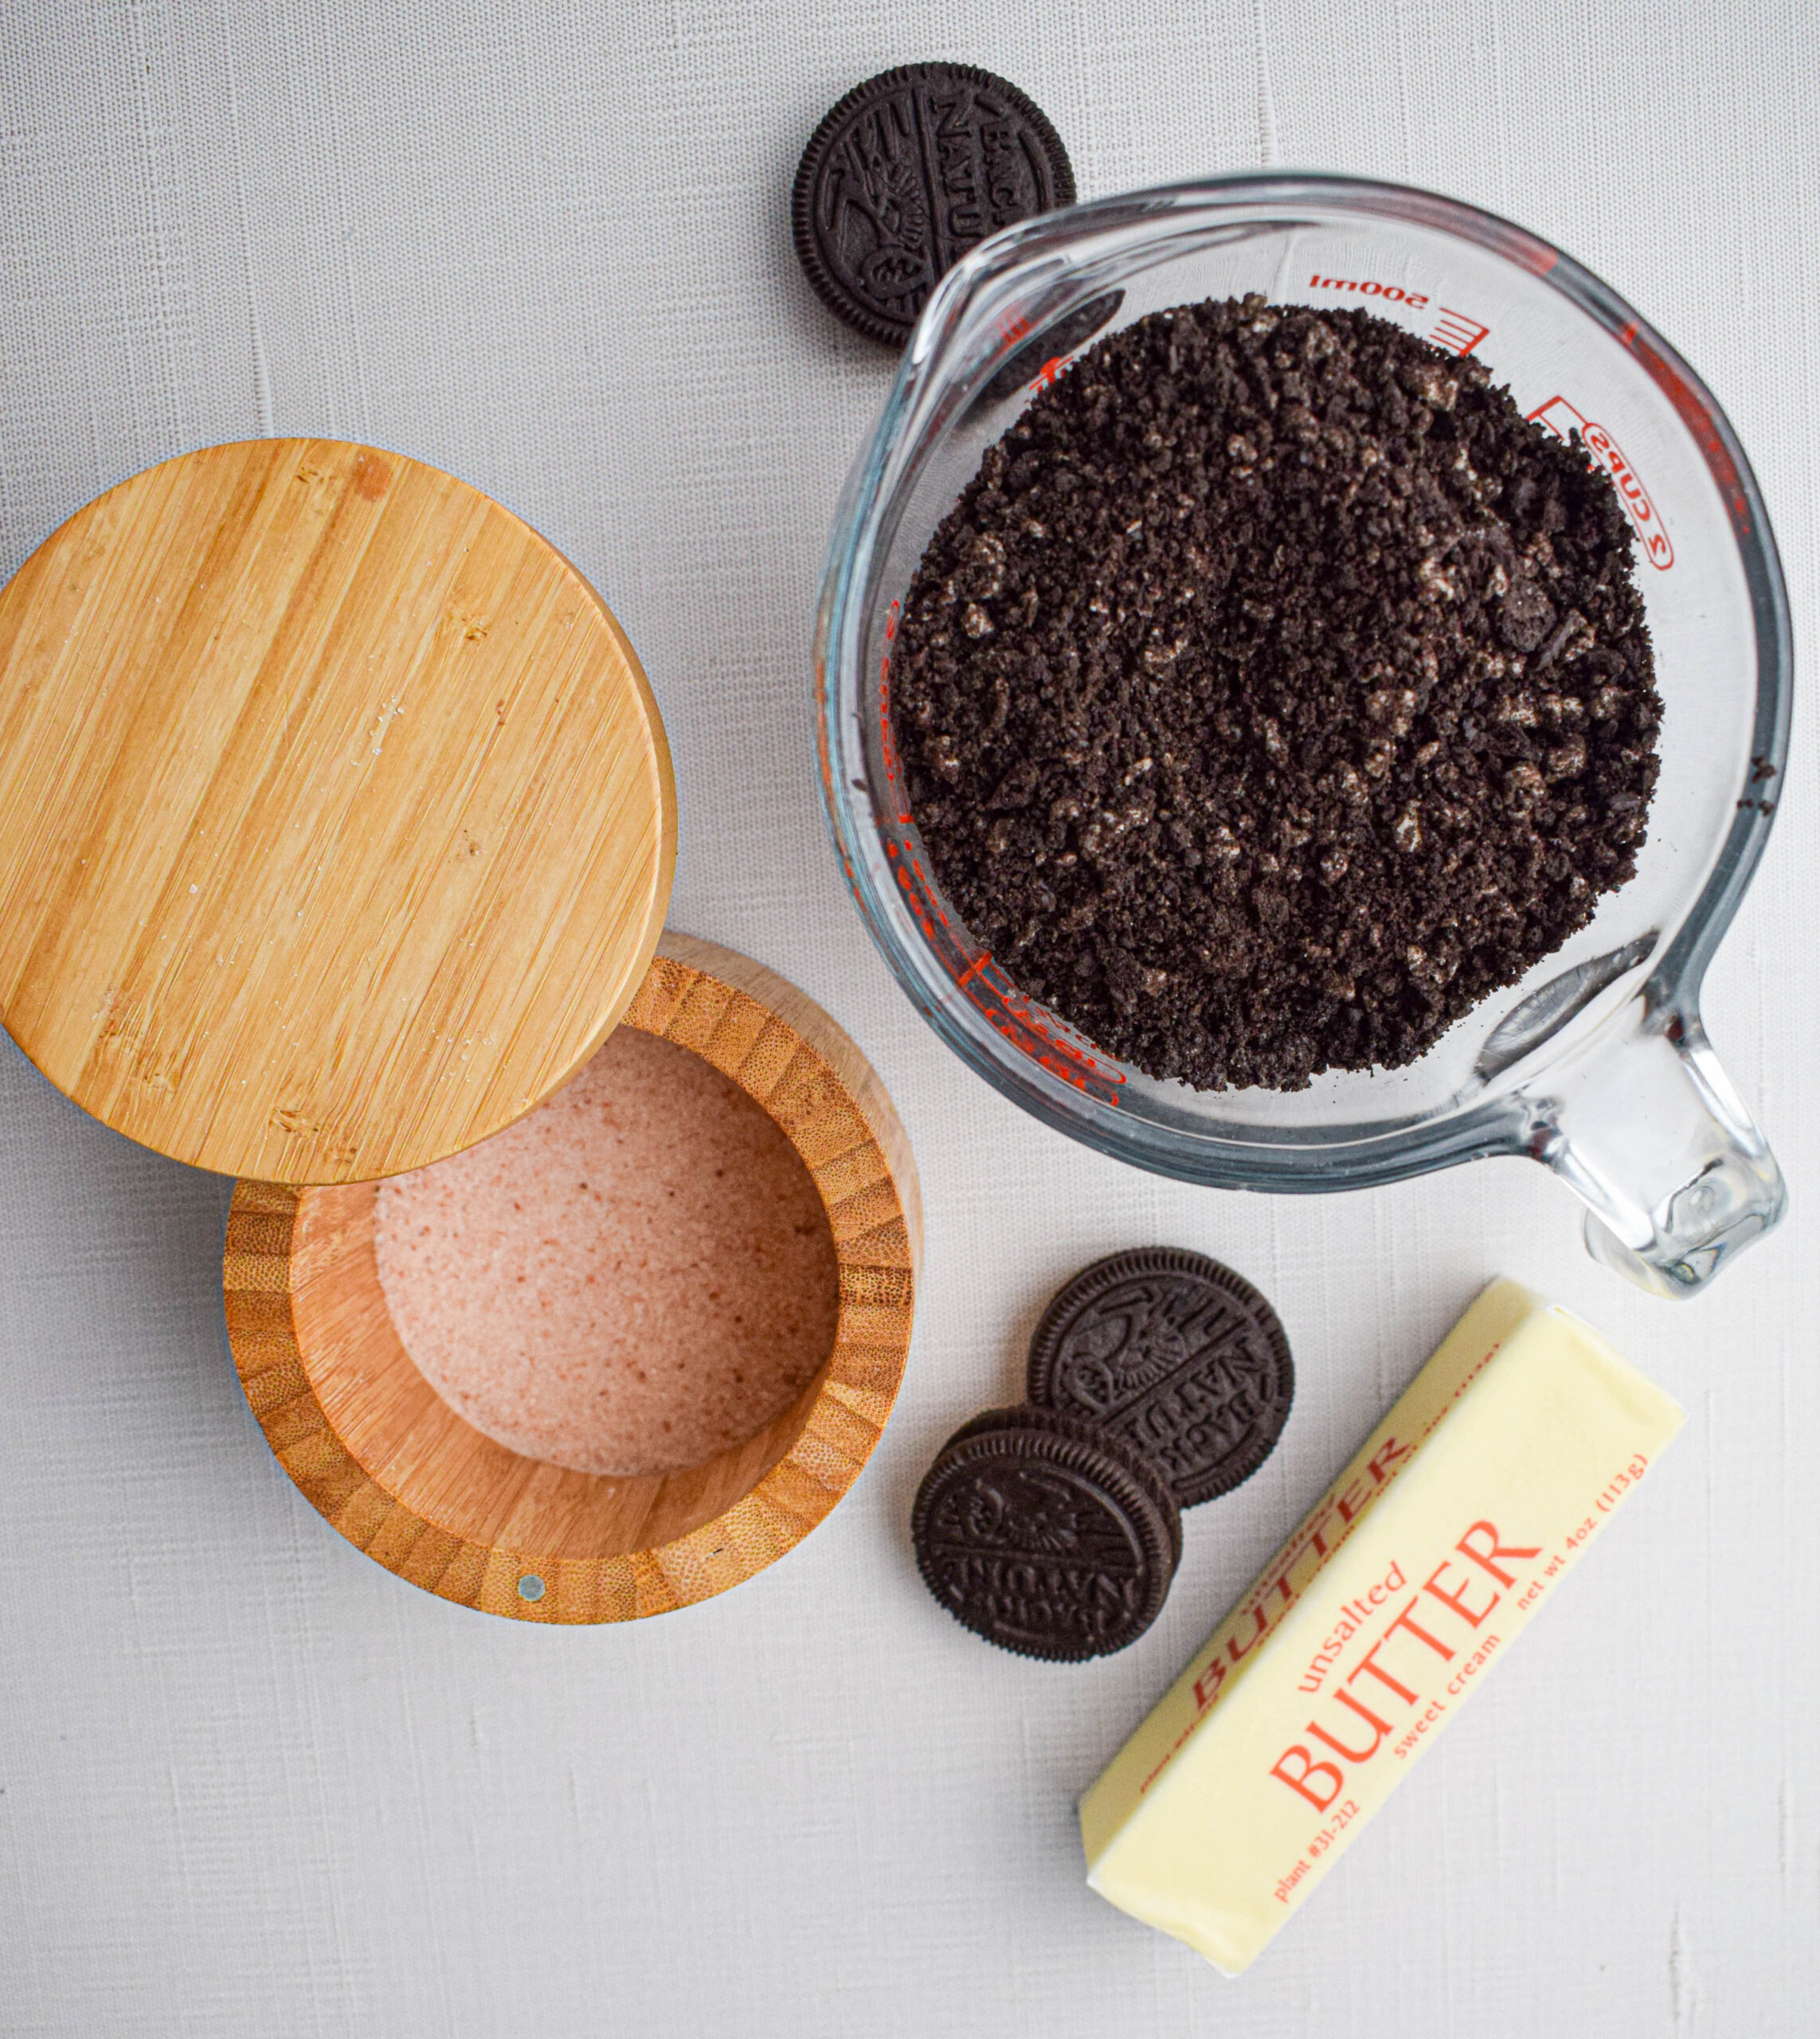 ingredients for a homemade Oreo pie crust: crushed Oreos, salt and butter